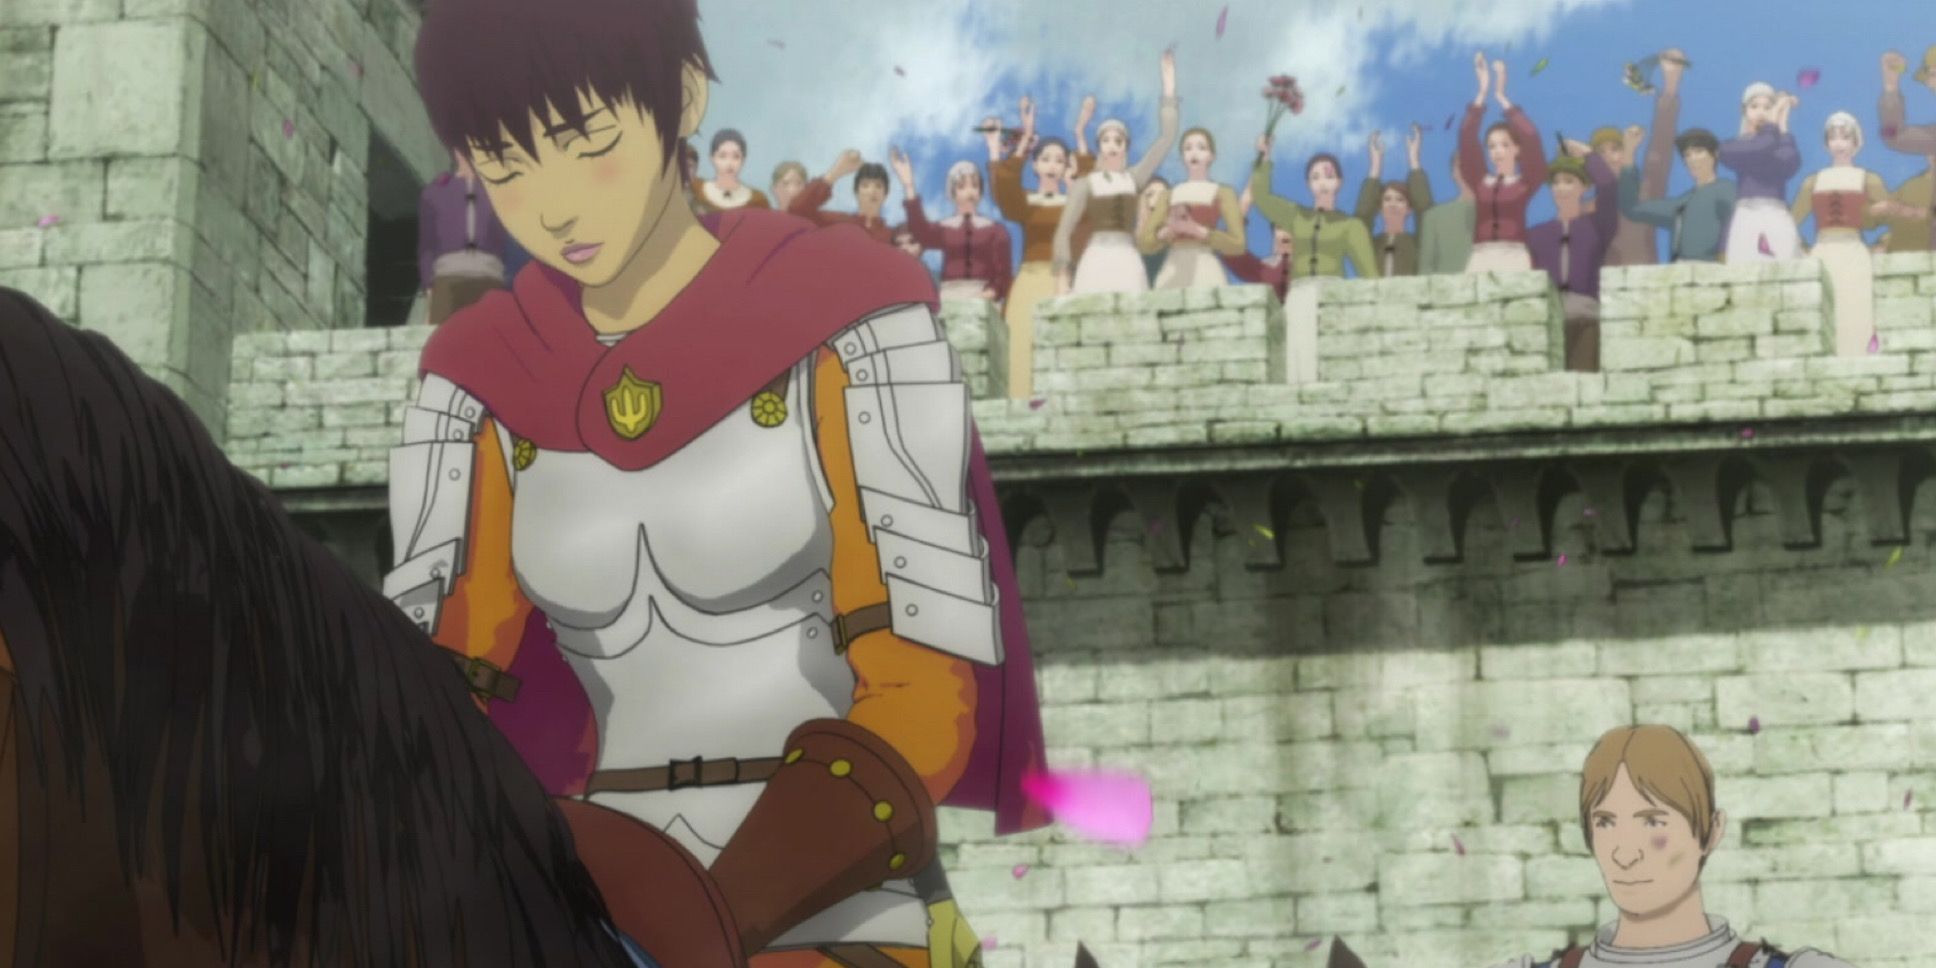 Casca embarrassed by her adoring fans during the parade in Berserk